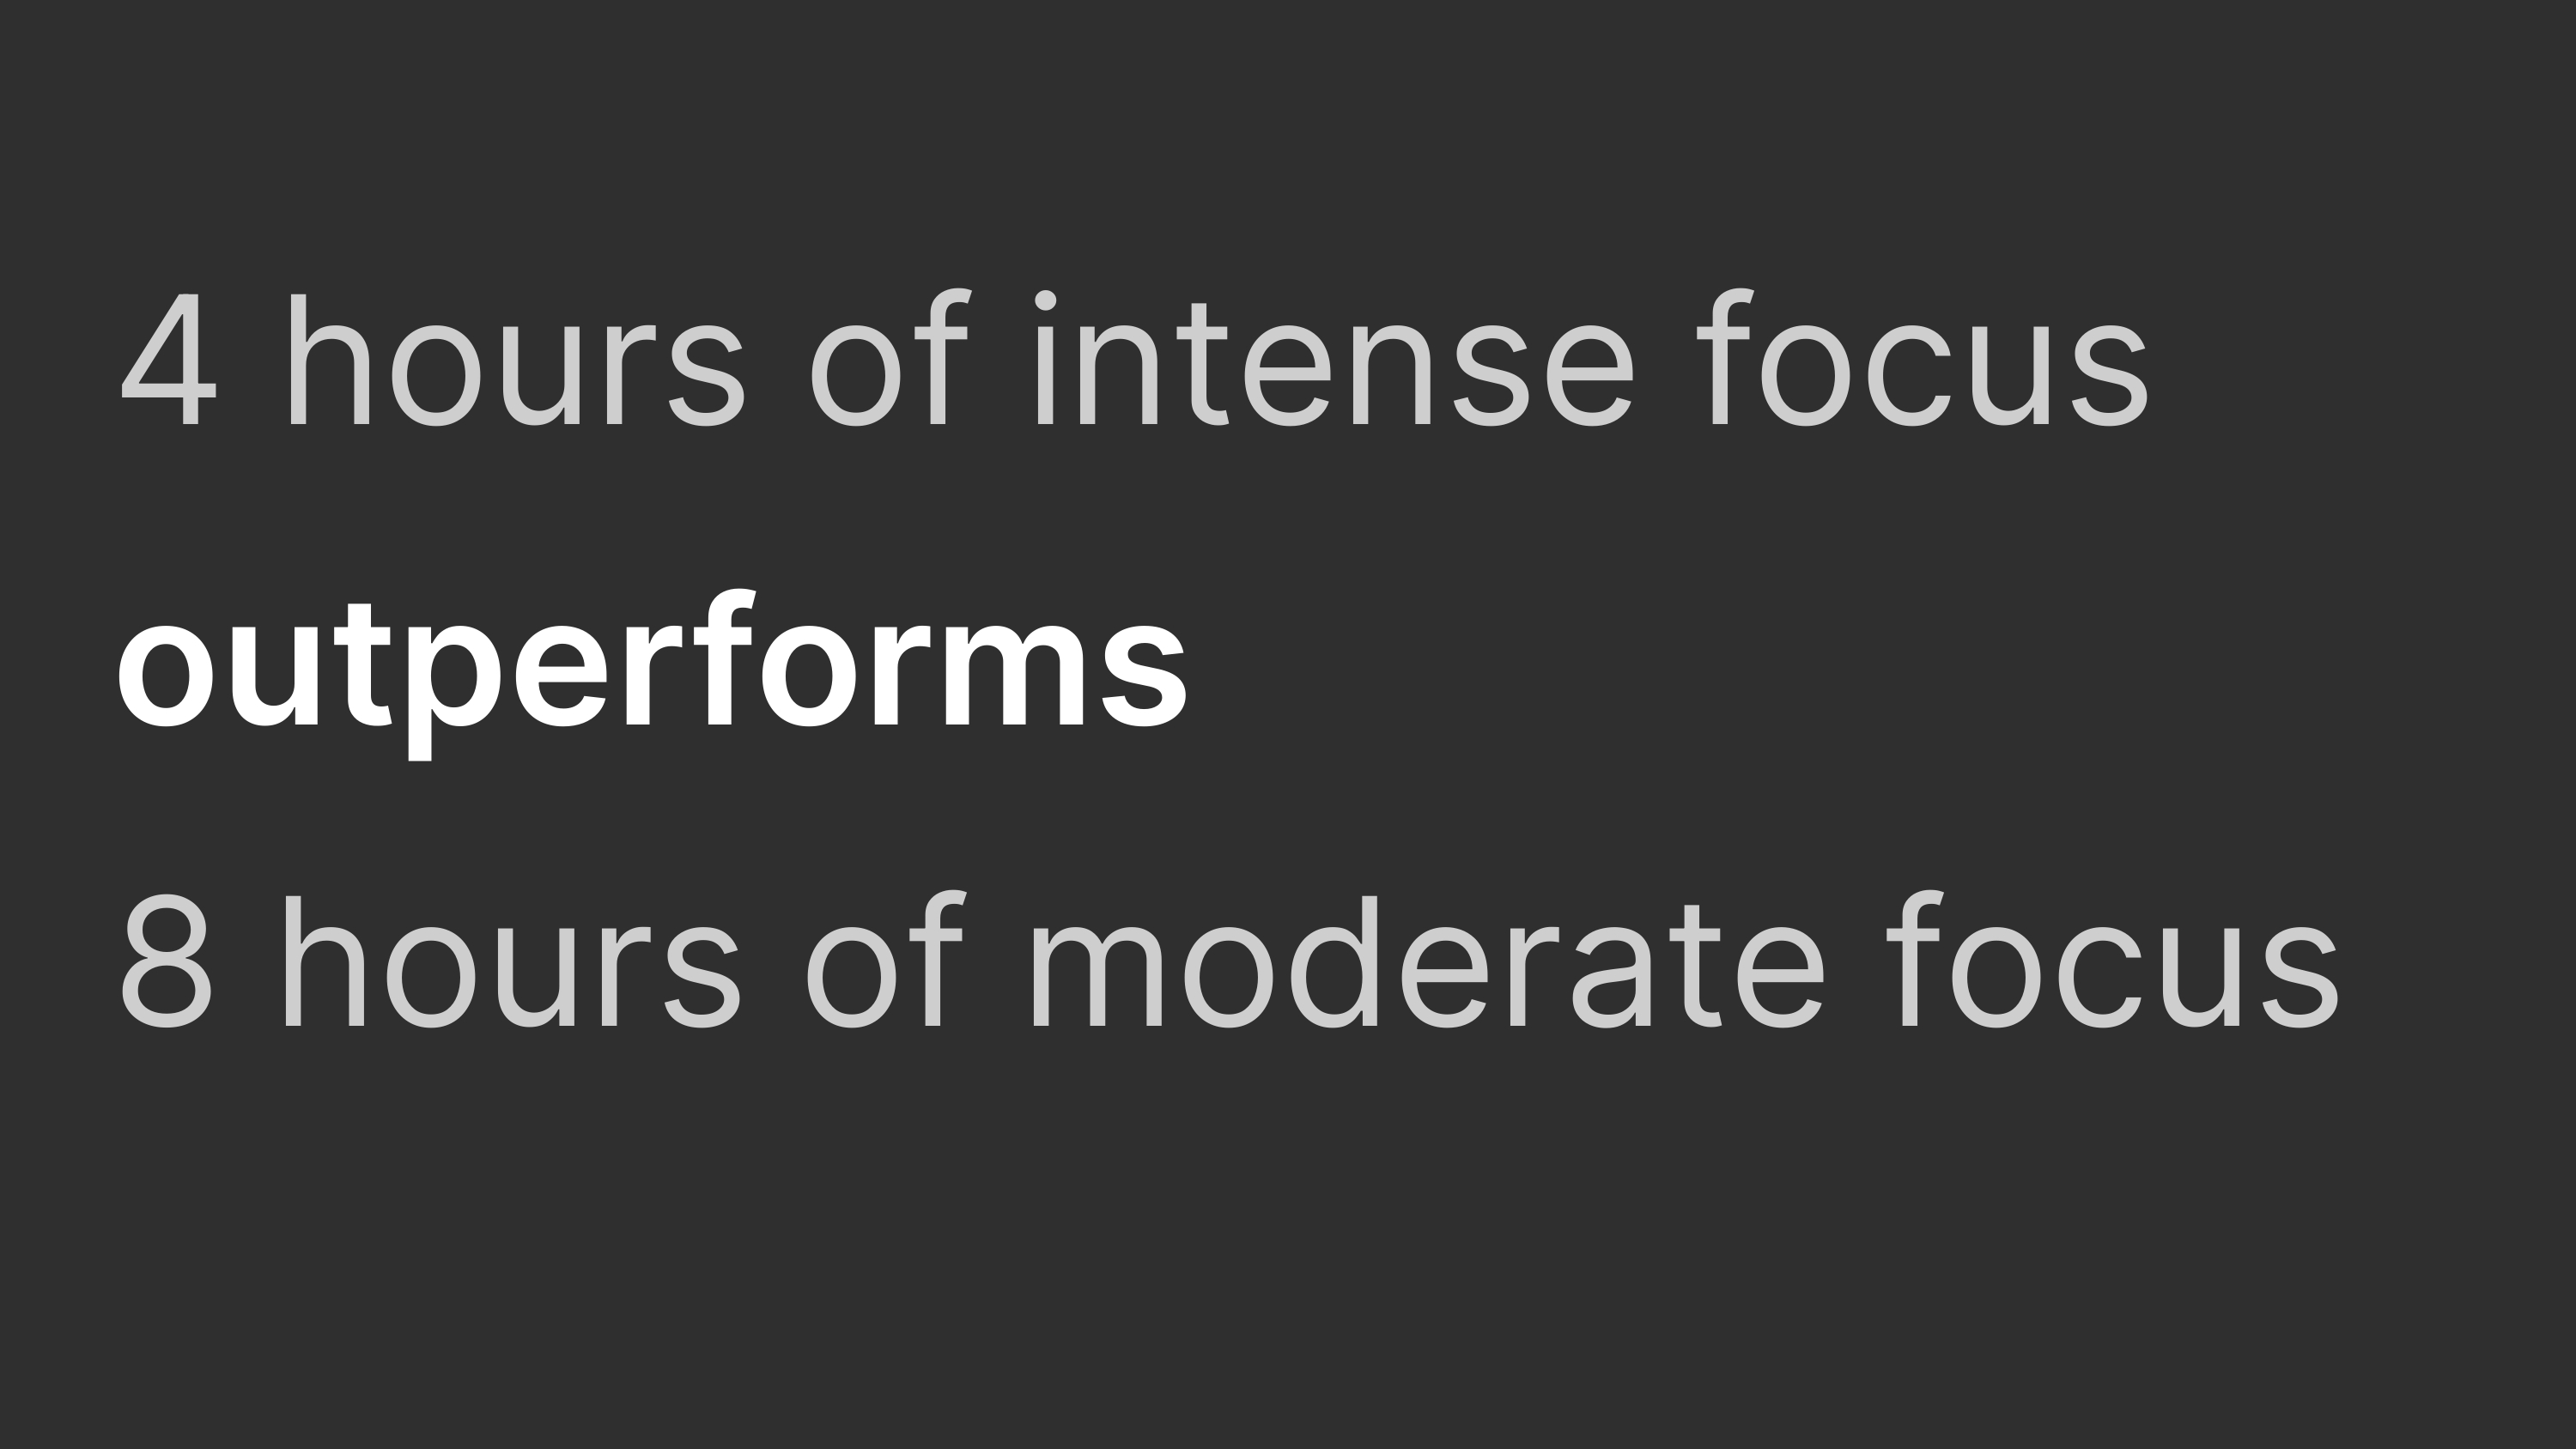 4 hours of intense focus outperforms 8 hours of moderate focus.